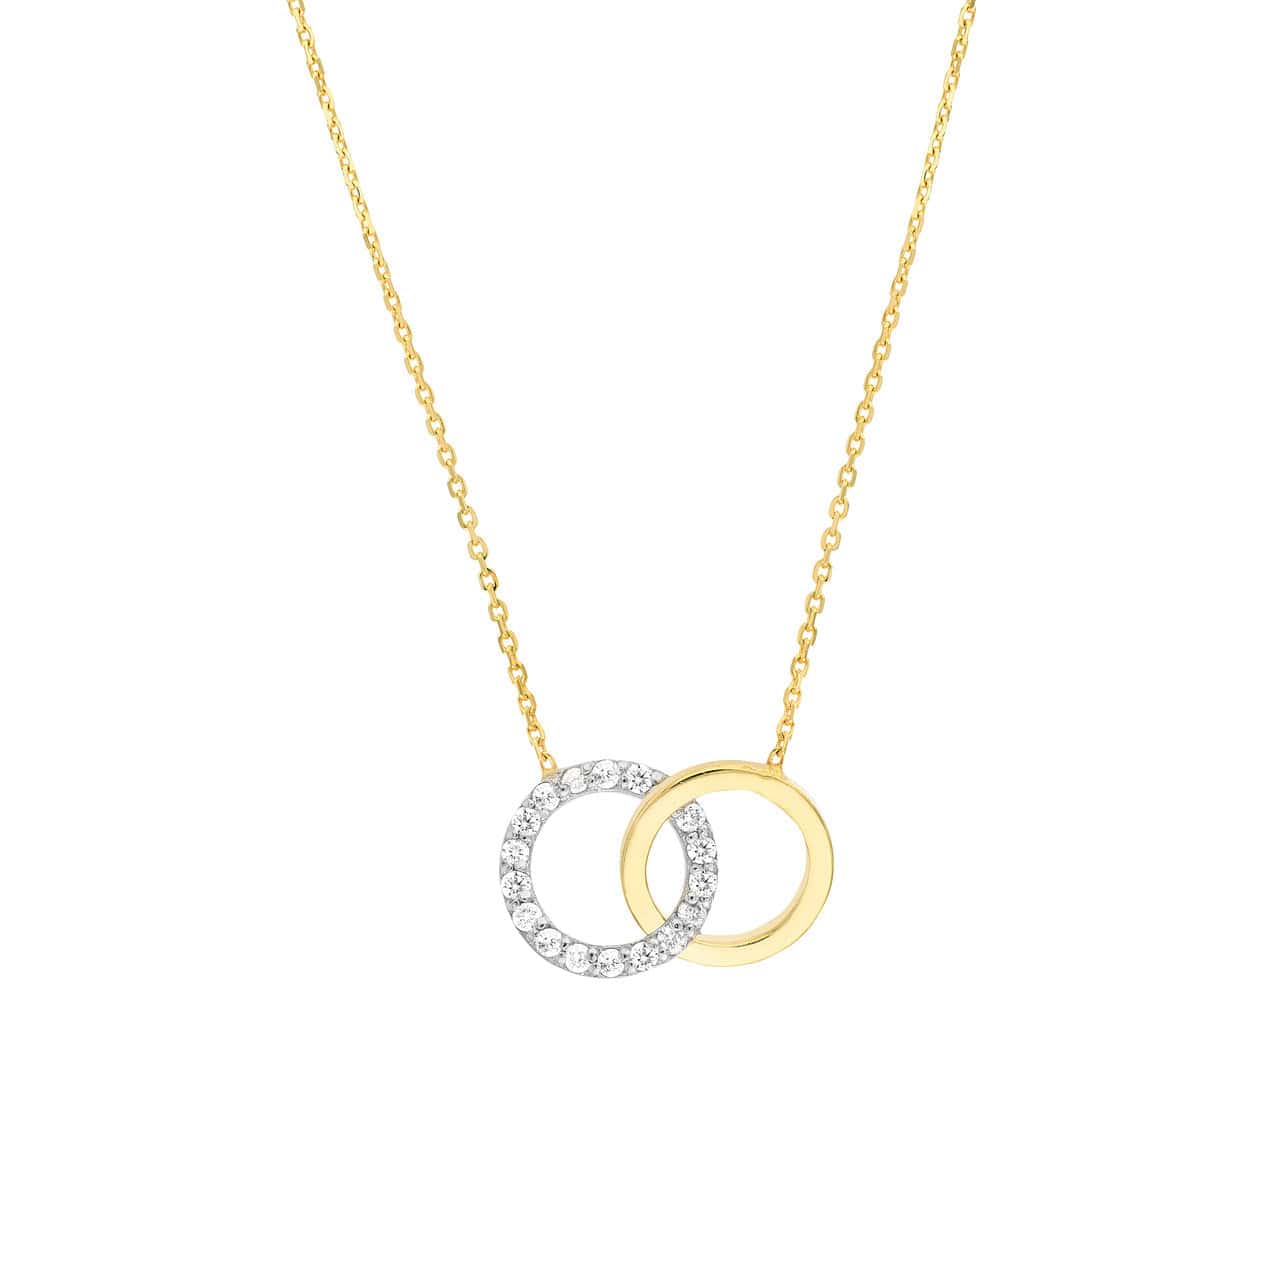 Adjustable 14K Adjustable Intertwined Two-Toned Diamond Circles Necklace